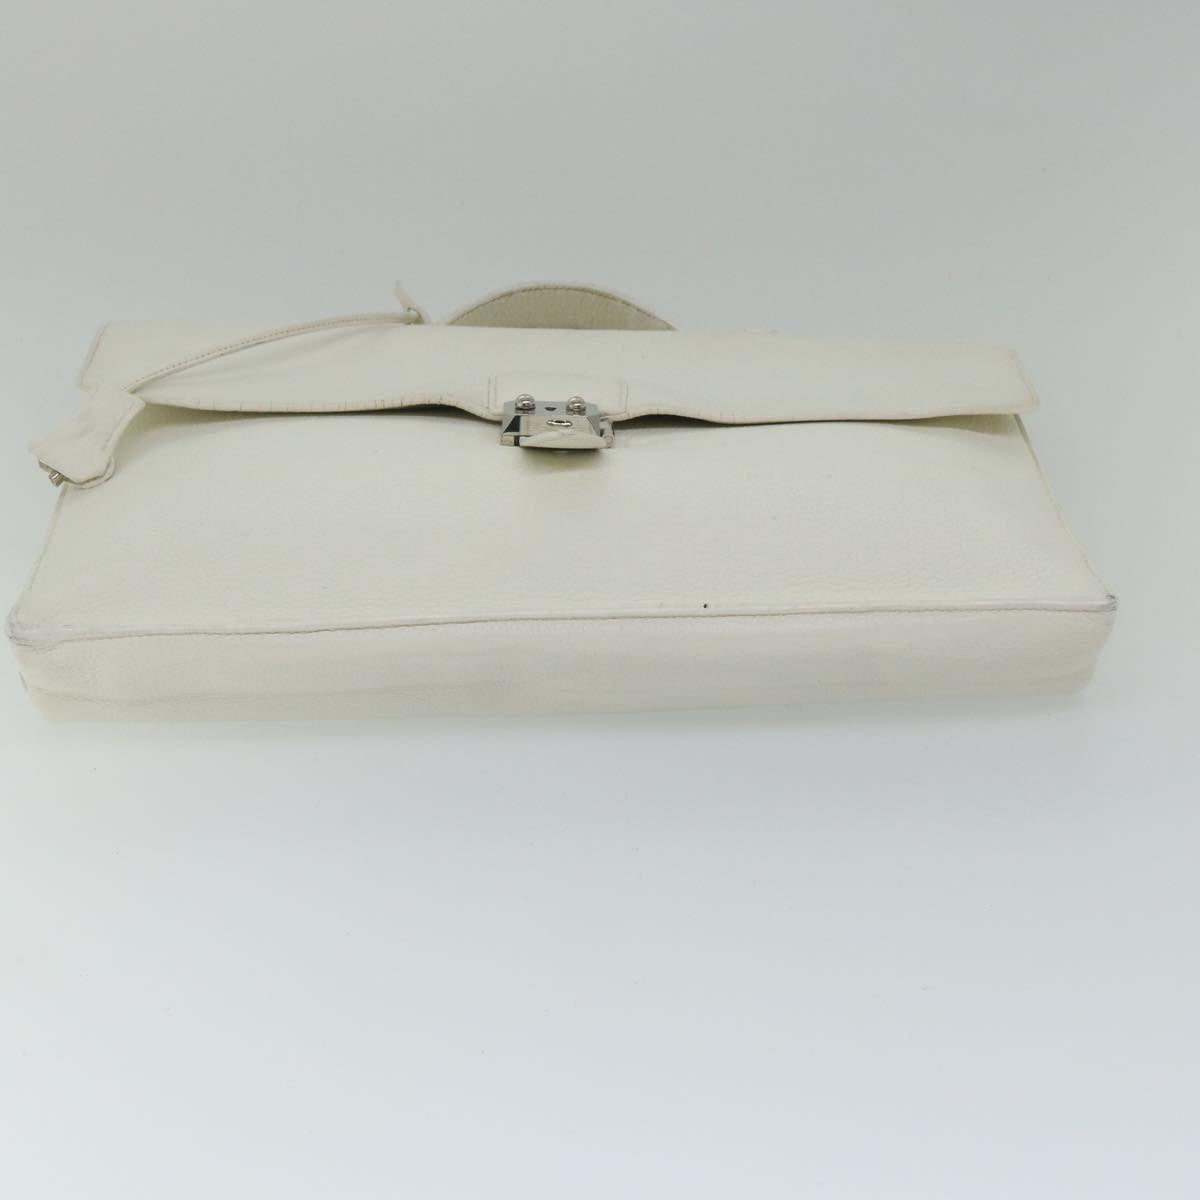 HERMES Sac Adepesh Business Bag Leather White Auth bs9397